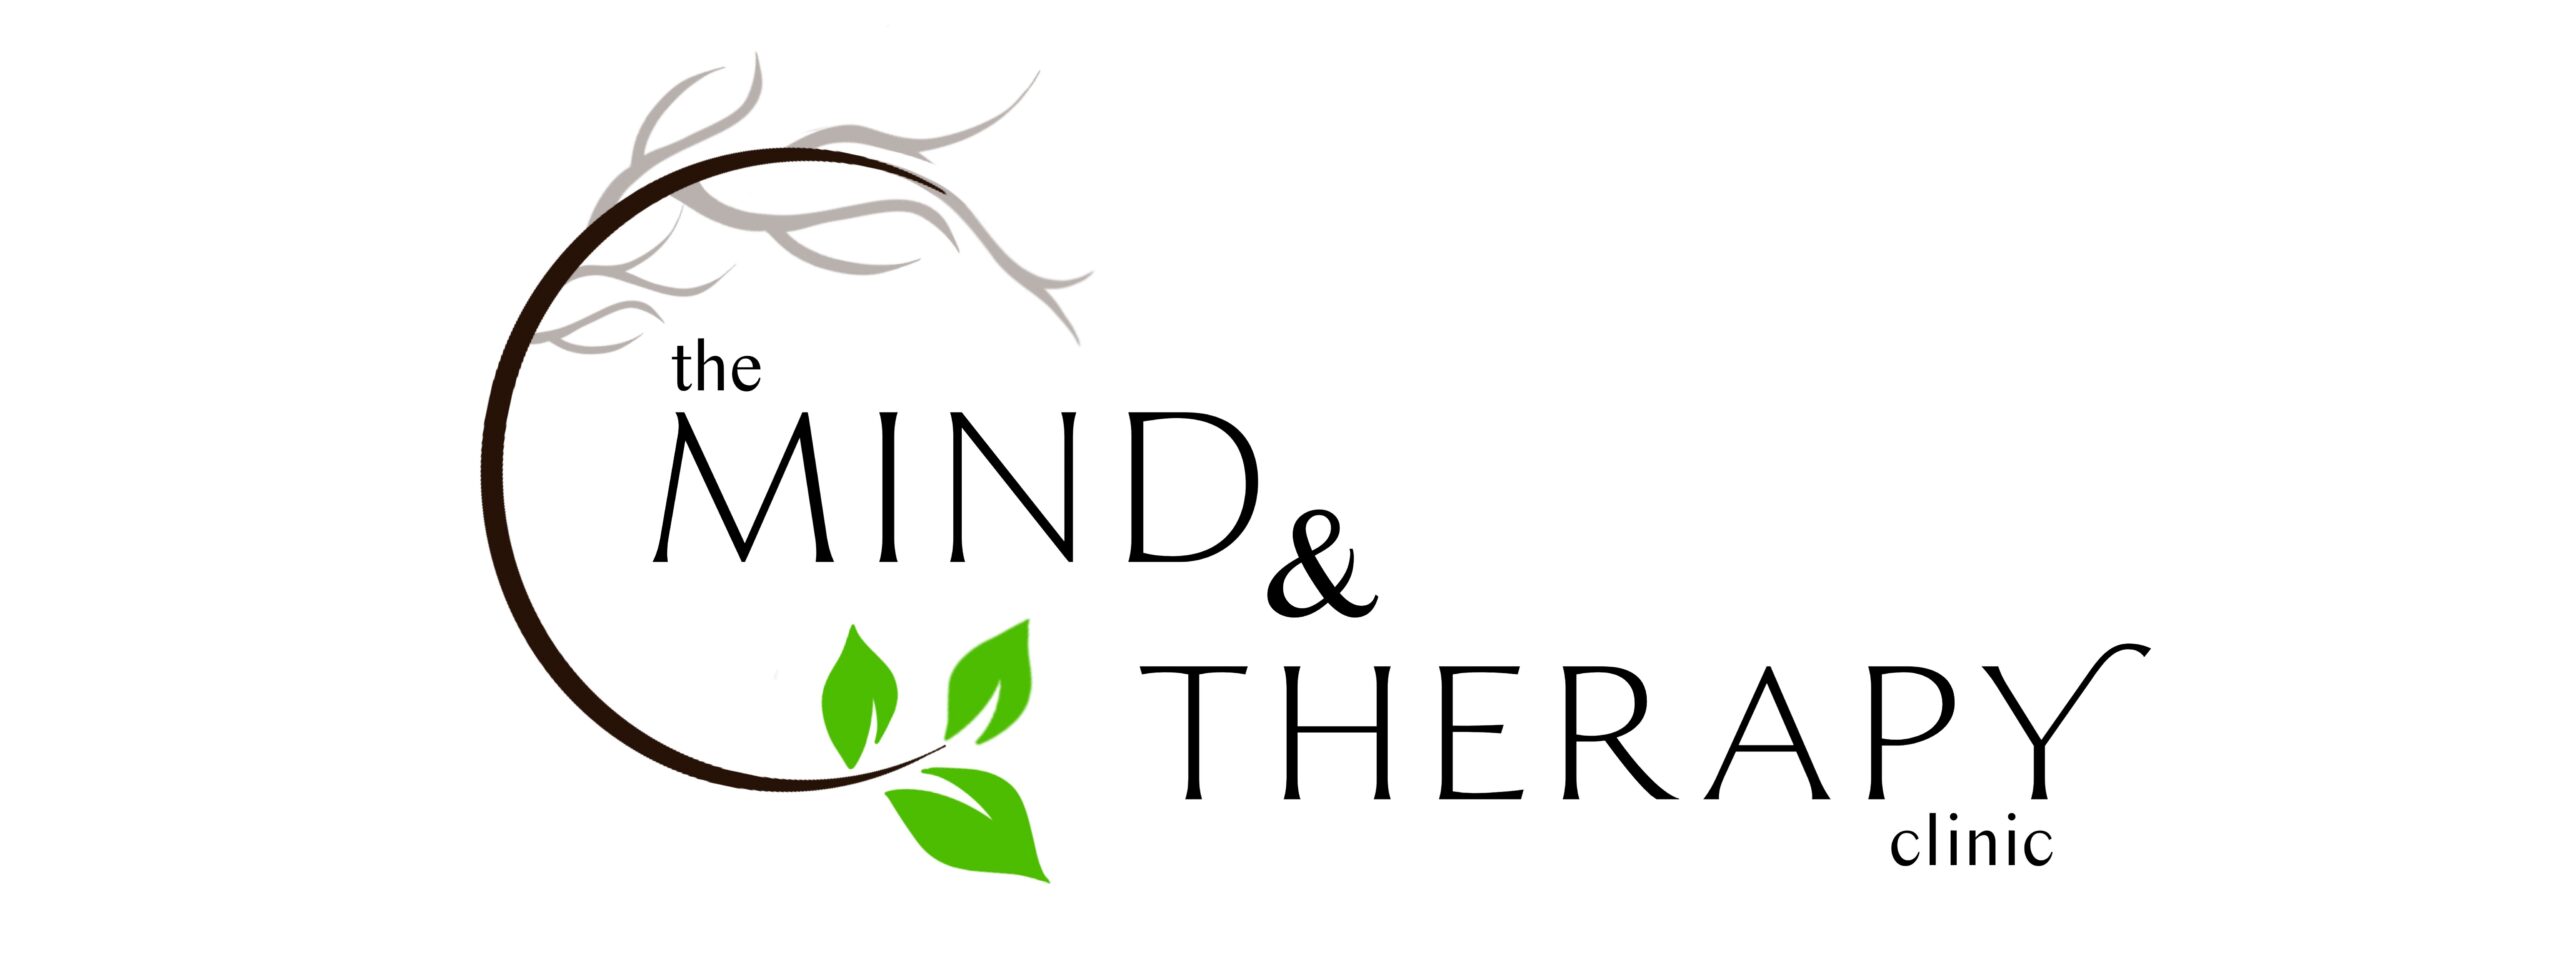 The Mind and Therapy Clinic